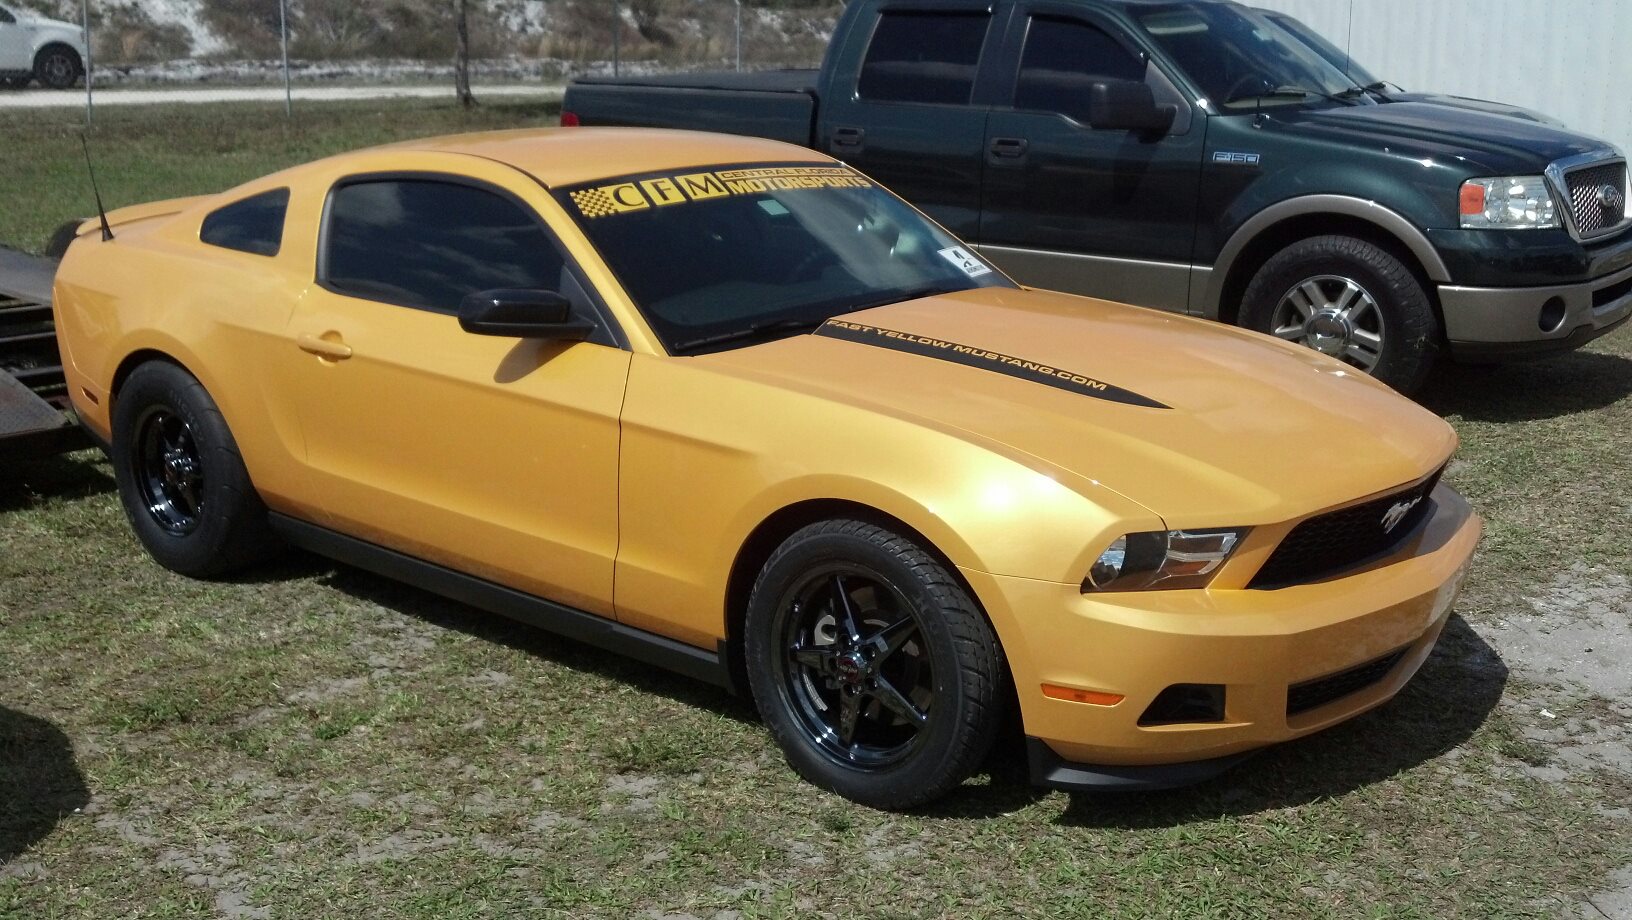 2011 Ford mustang gt quarter mile times #5